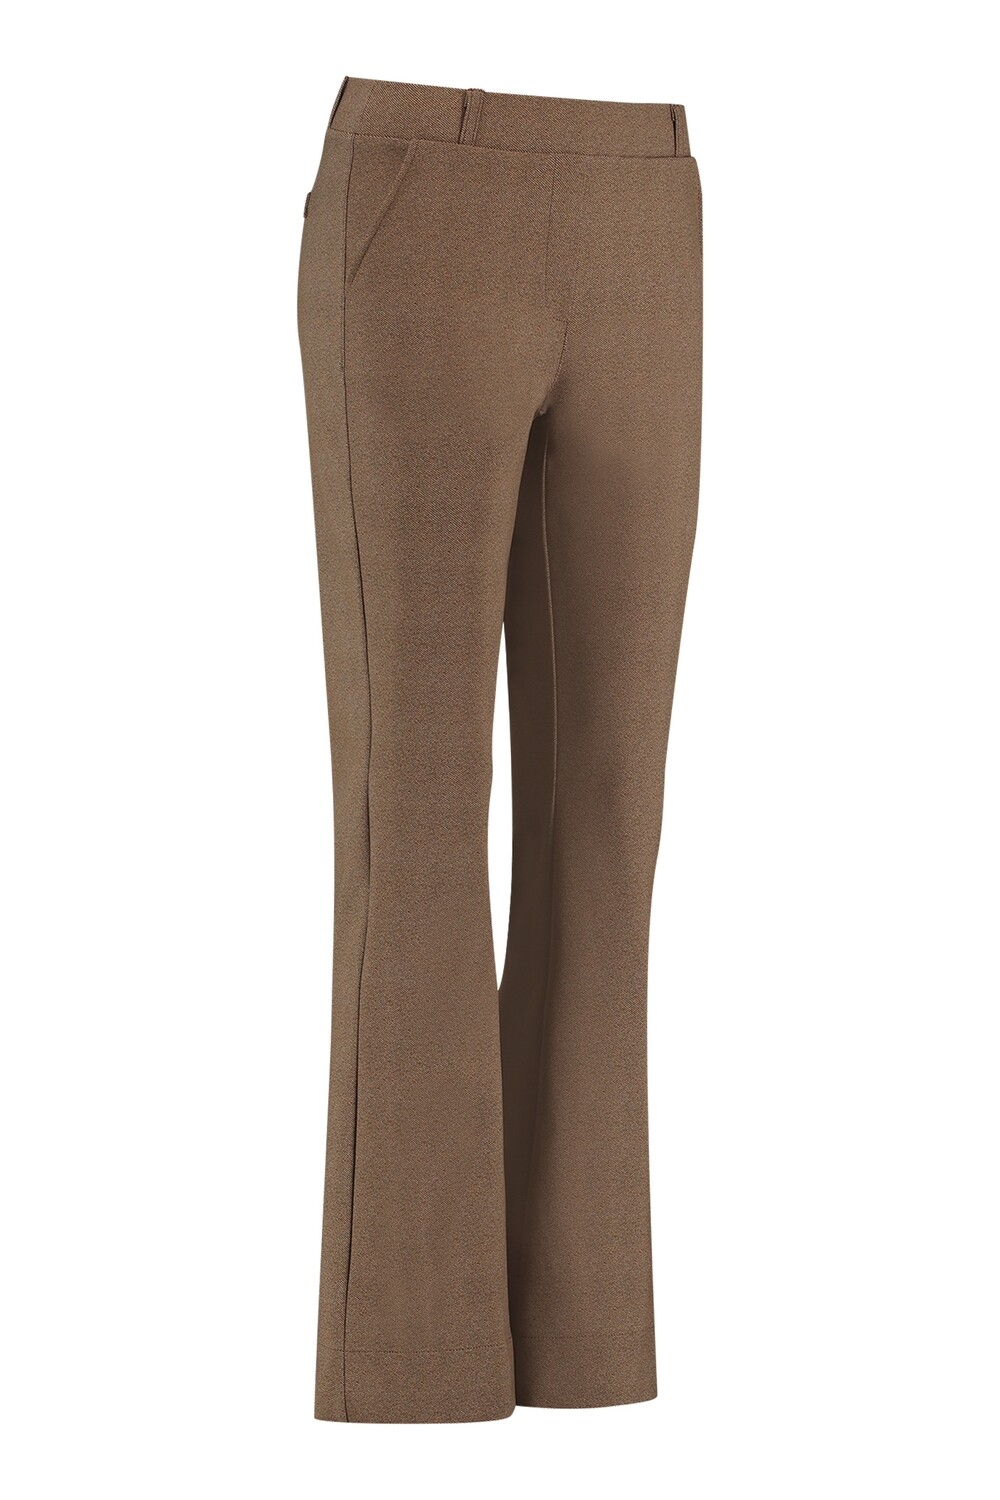 Studio Anneloes Flair bonded weave trousers